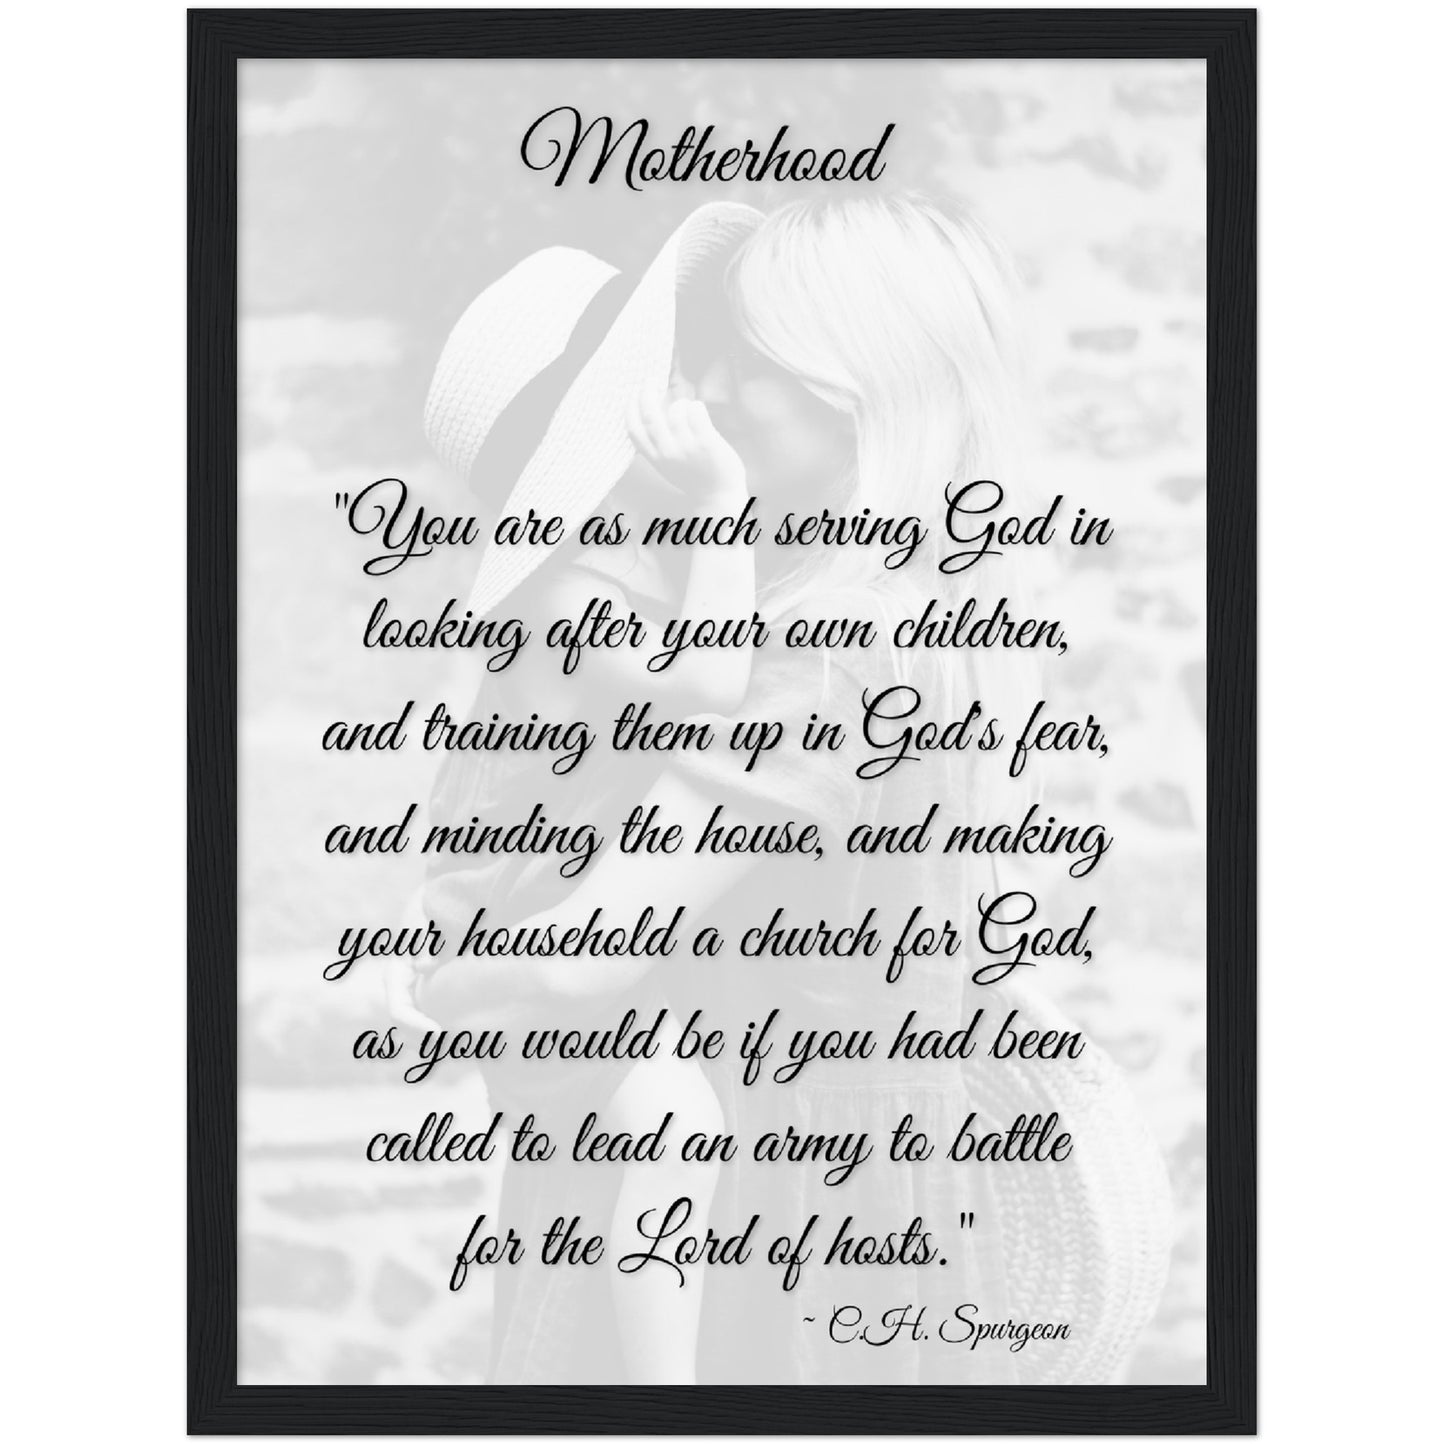 Framed Motherhood Quote Slightly Transparent | Quote by C.H. Spurgeon Poster | Christian Wall Art for Mom